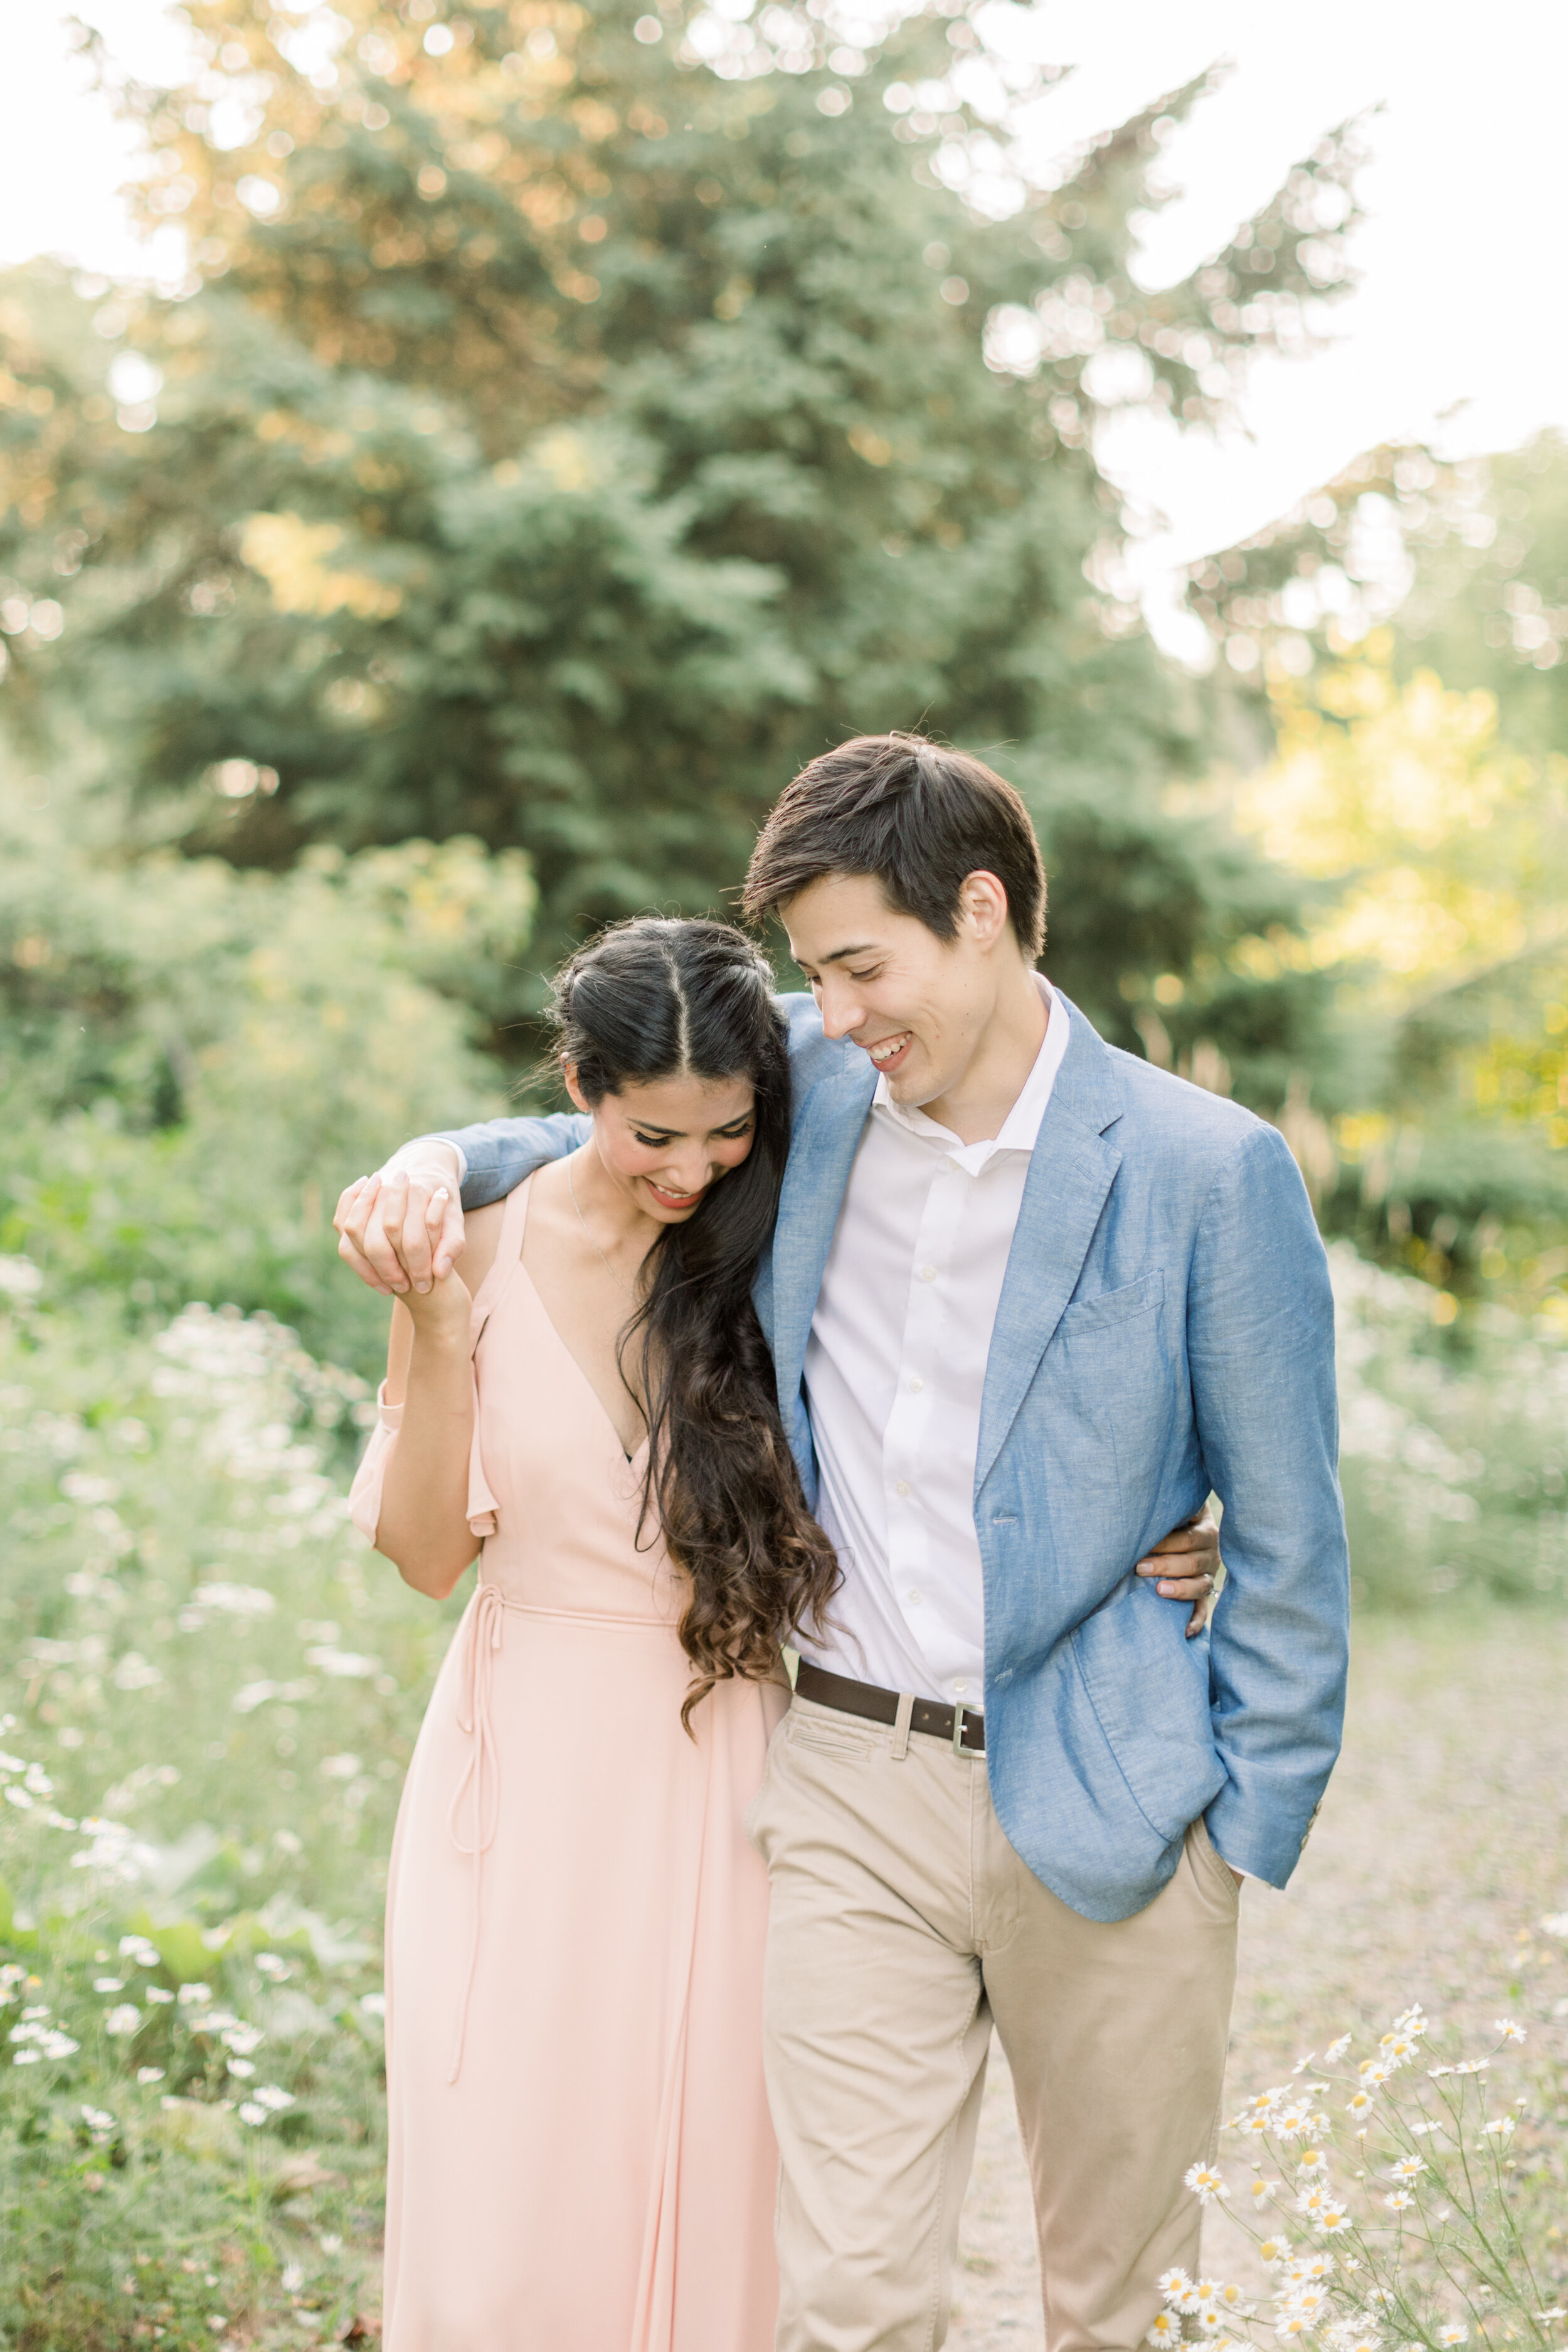  Beautiful couple in ideal outdoor location at arboretum in Ottawa, ON by Chelsea Mason Photography. outdoor location for engagements best place to take photos in ottawa where should we take engagements in ottawa how to dress for engagements best out